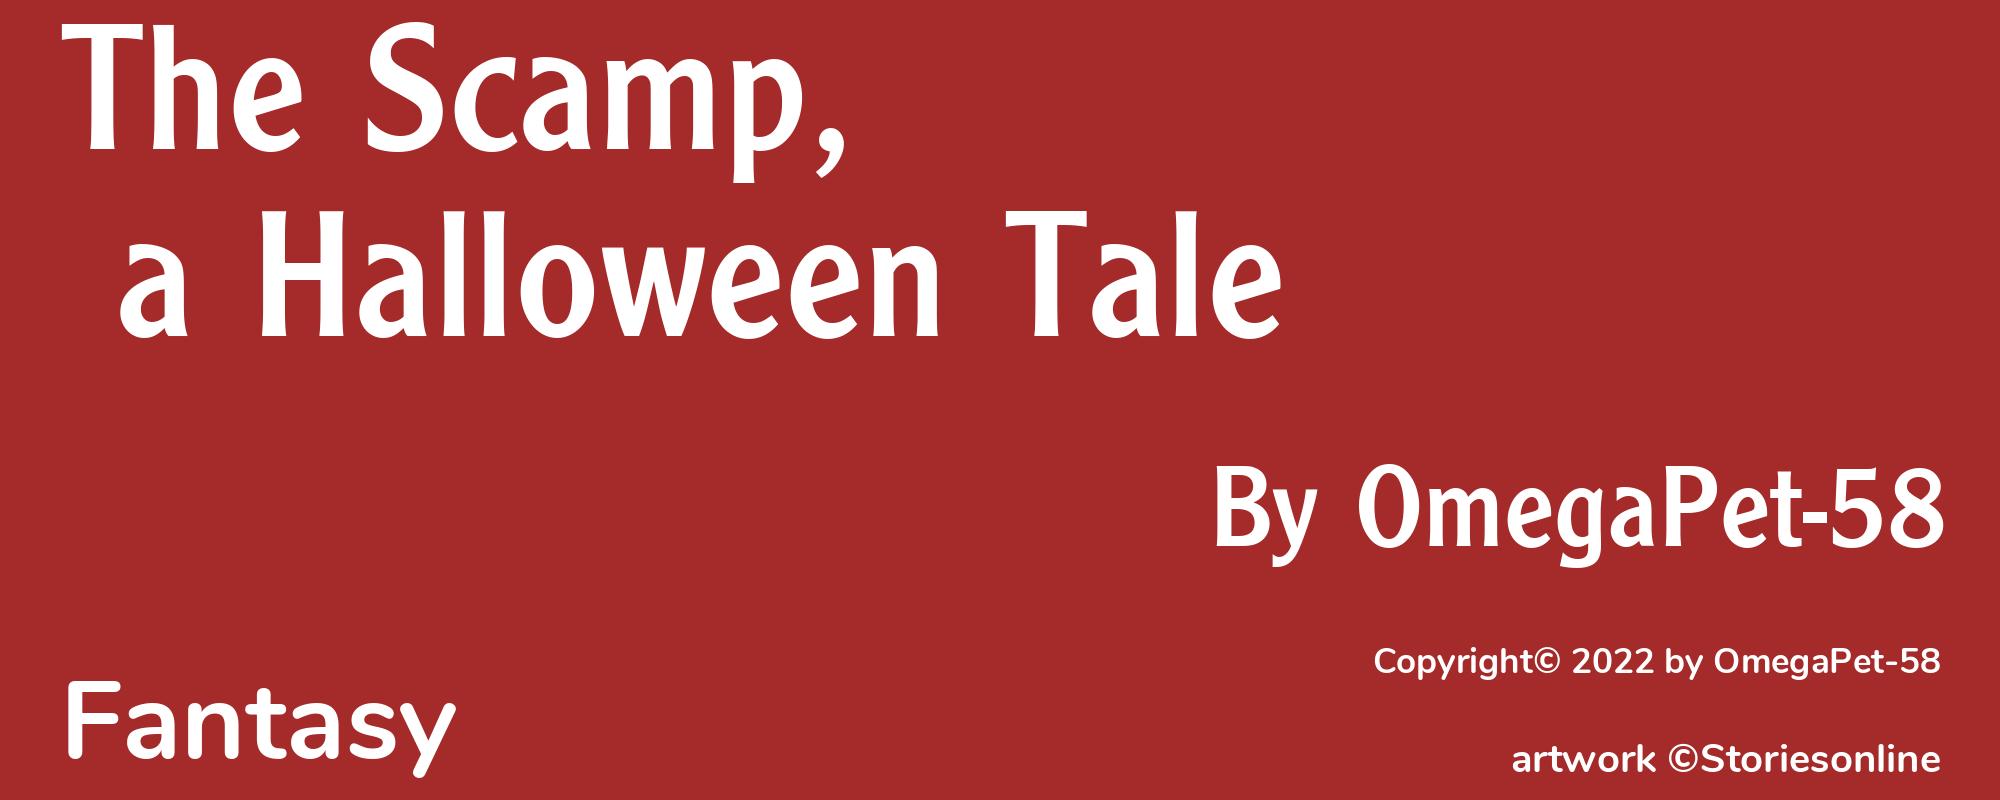 The Scamp, a Halloween Tale - Cover